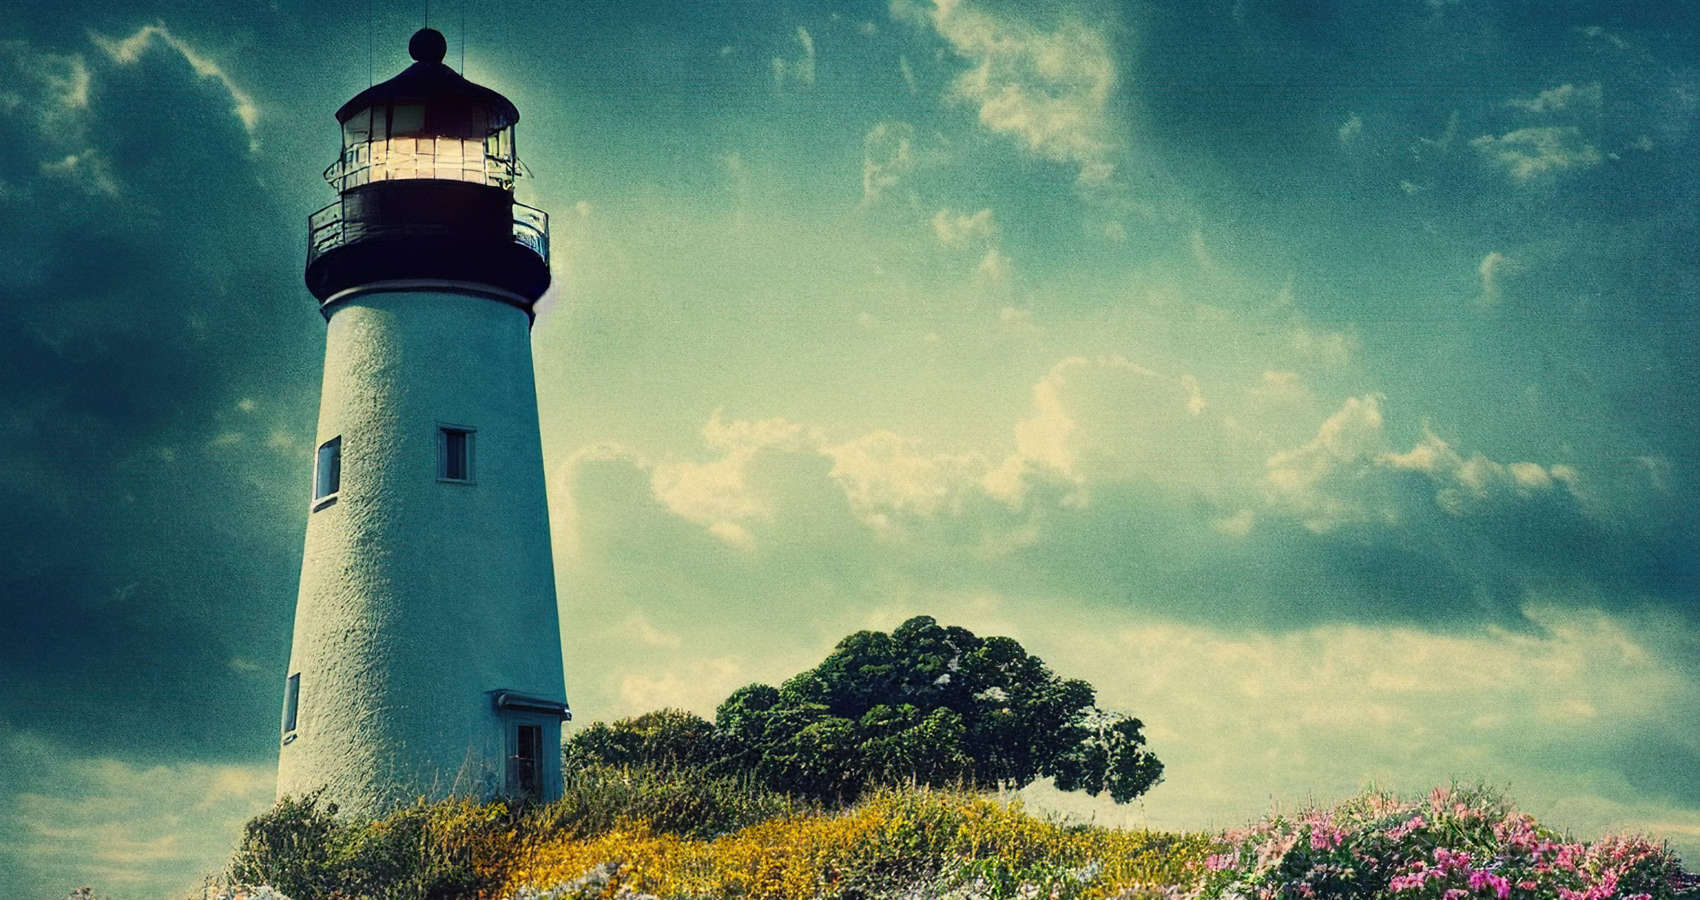 The Lighthouse, fiction by Sharon Frame Gay at Spillwords.com